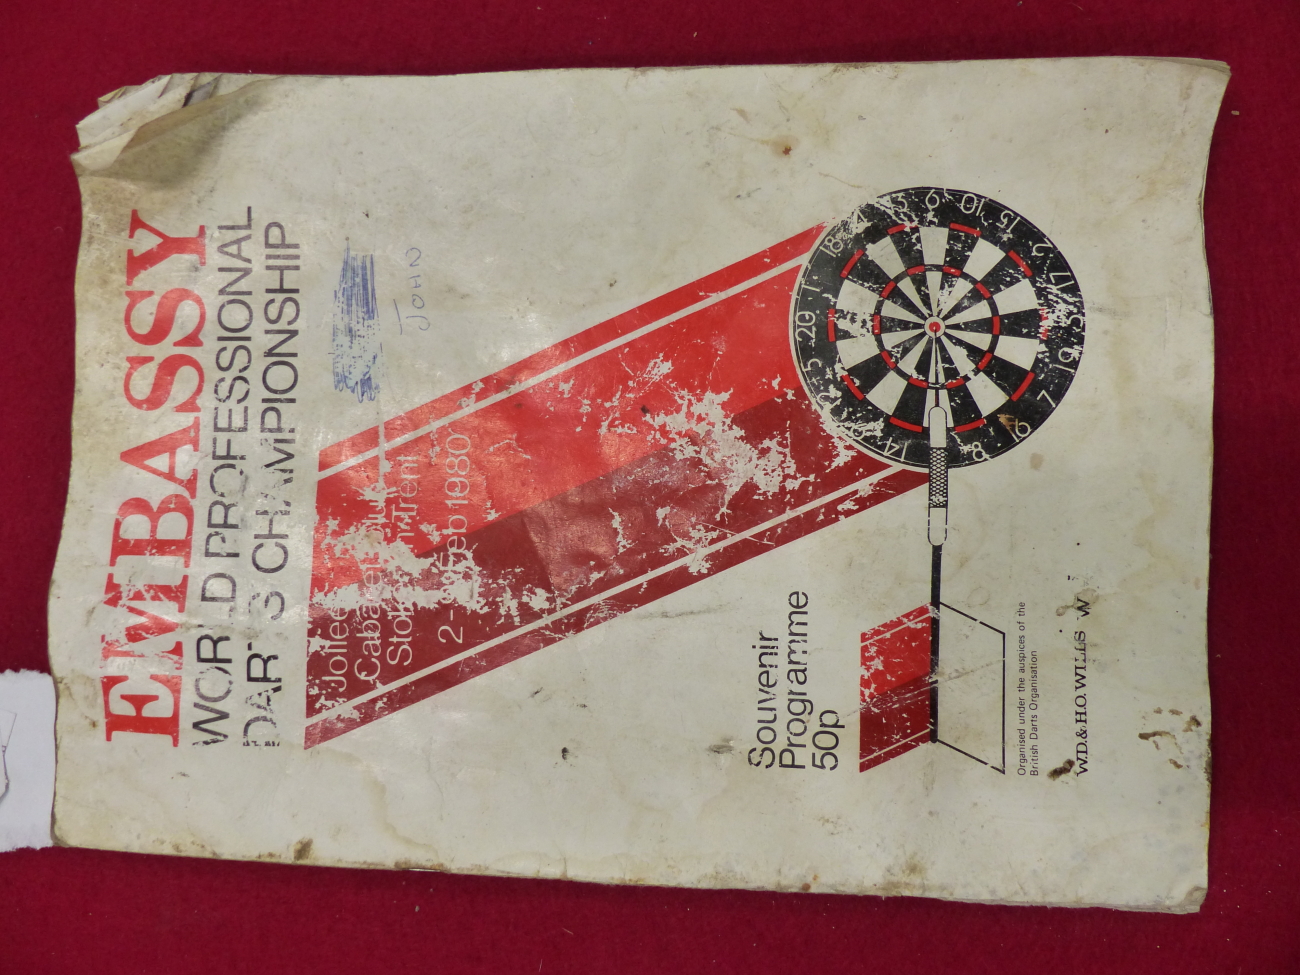 AN EMBASSY WORLD DARTS CHAMPIONSHIP PROGRAMME NK SIGNED BY THE PLAYERS FROM THE 1980'S.